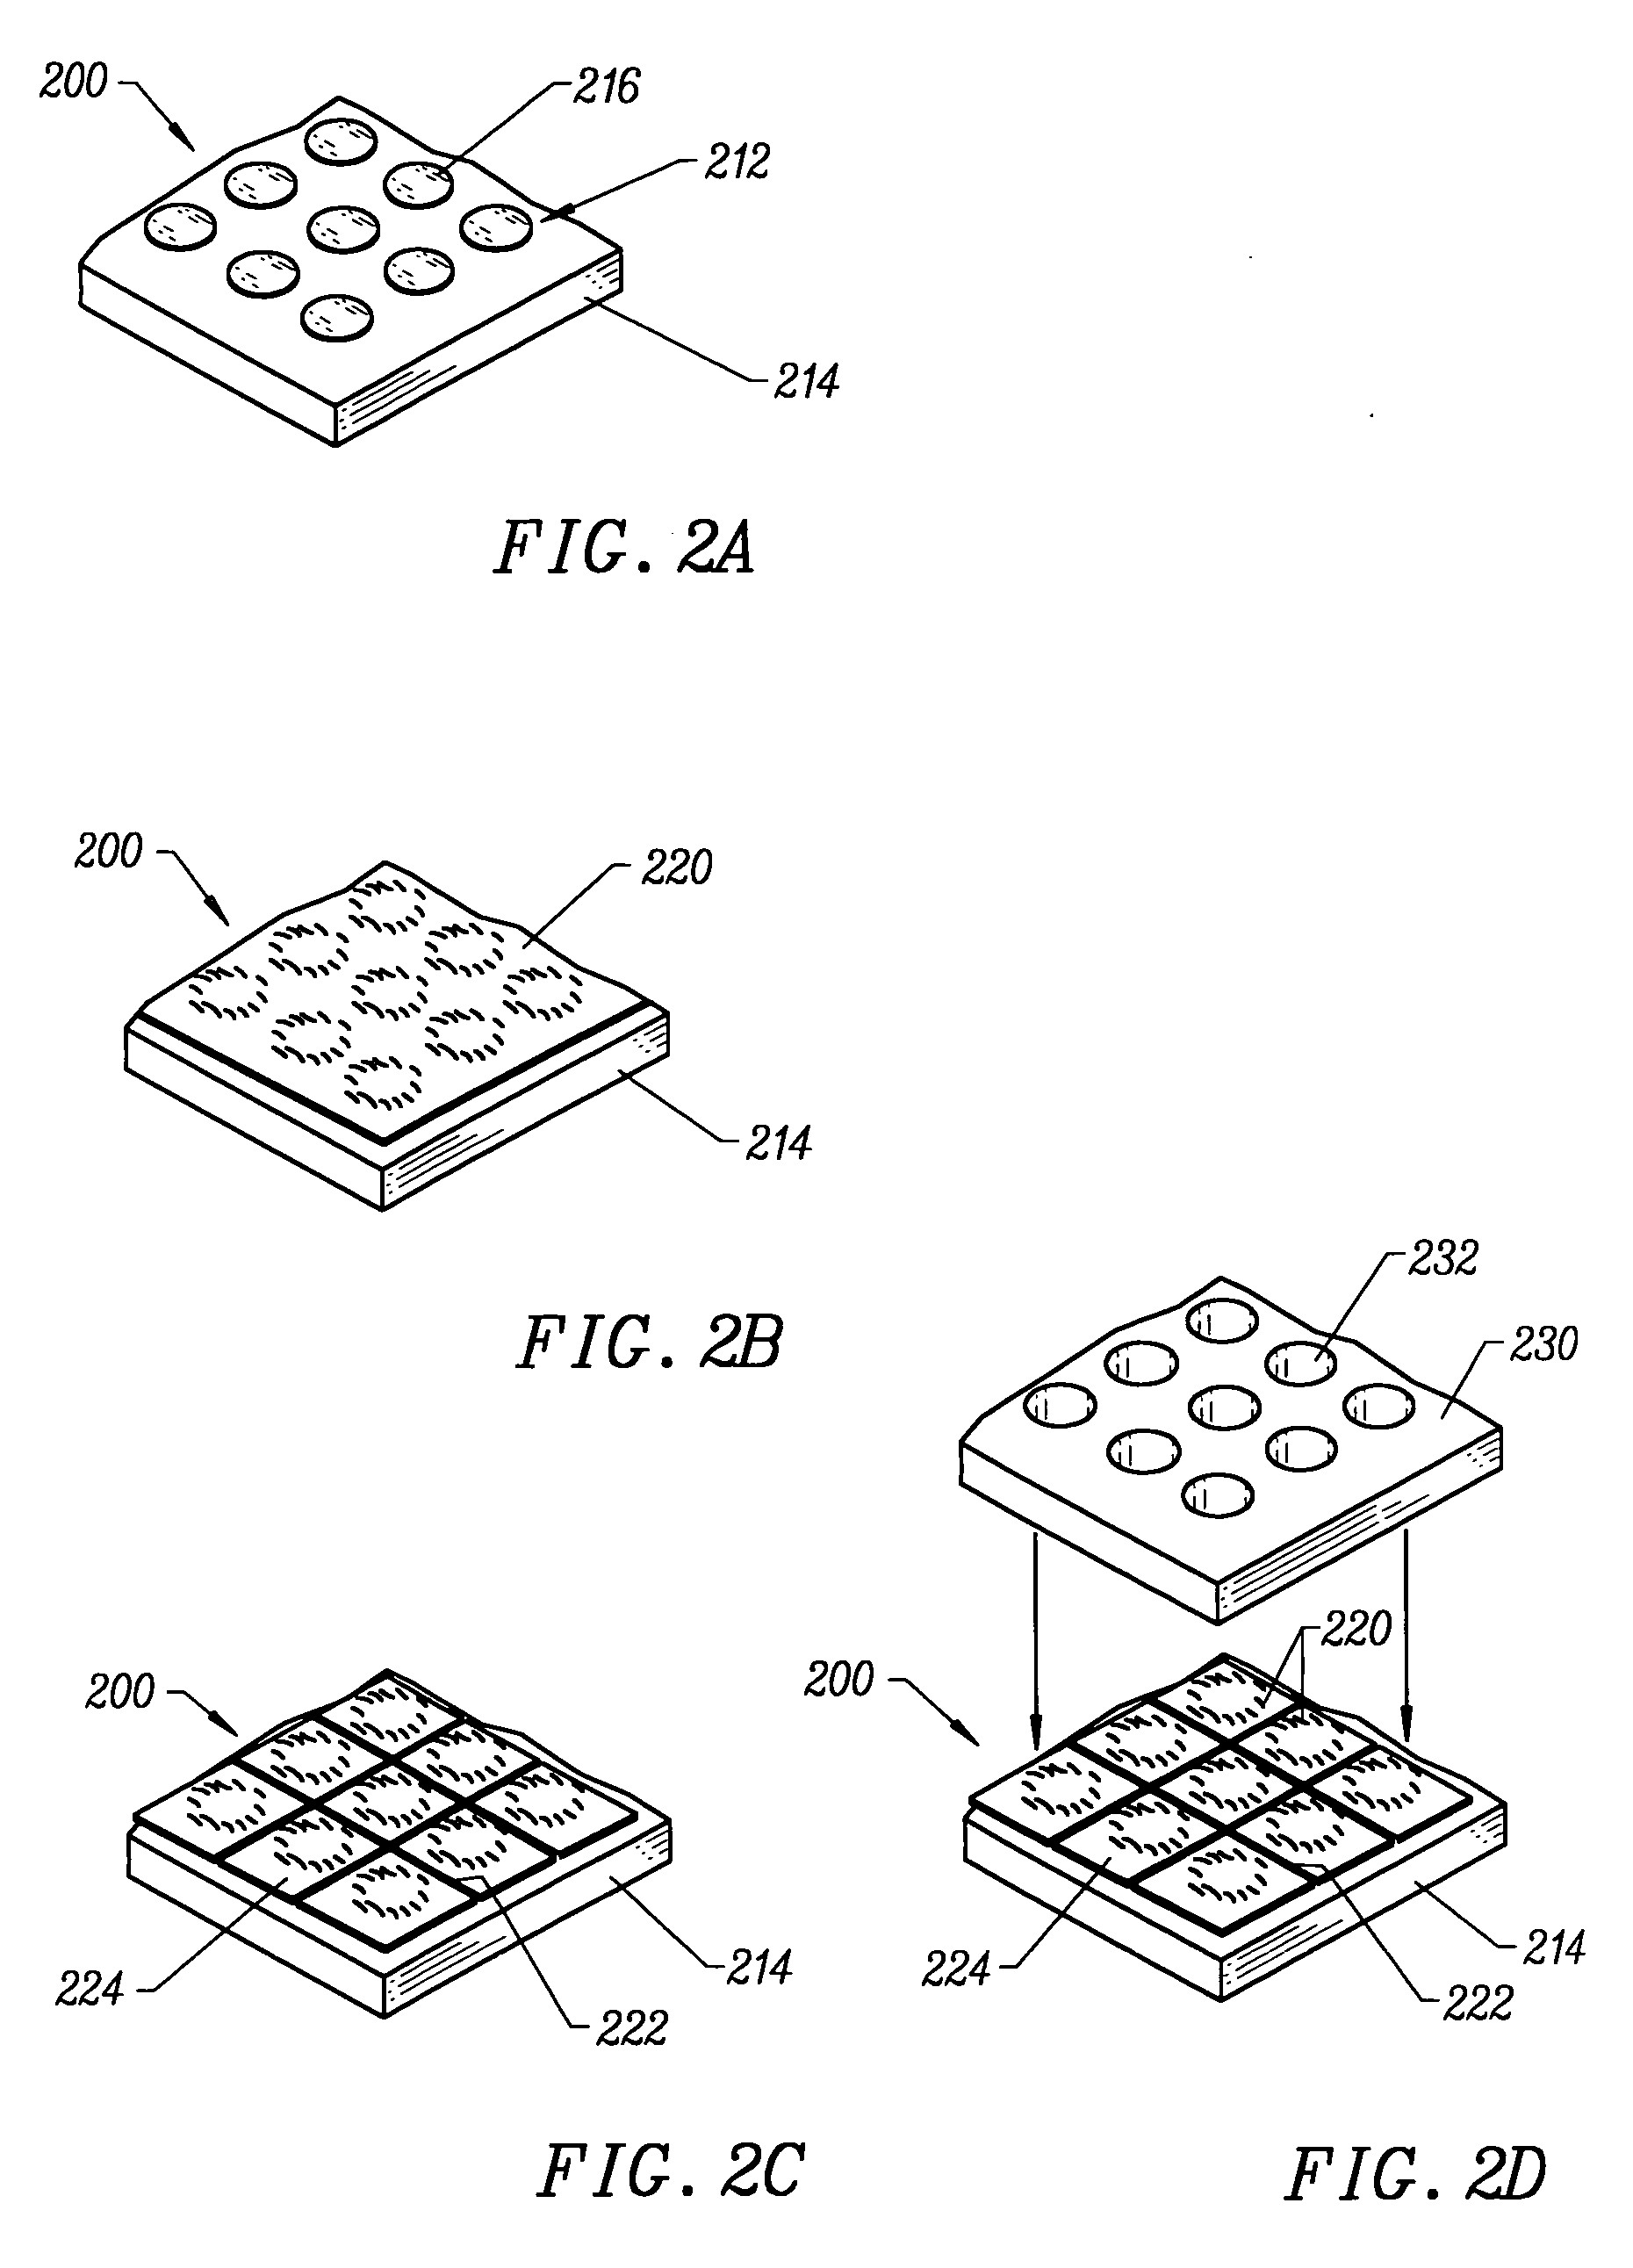 System and method for optimizing tissue barrier transfer of compounds